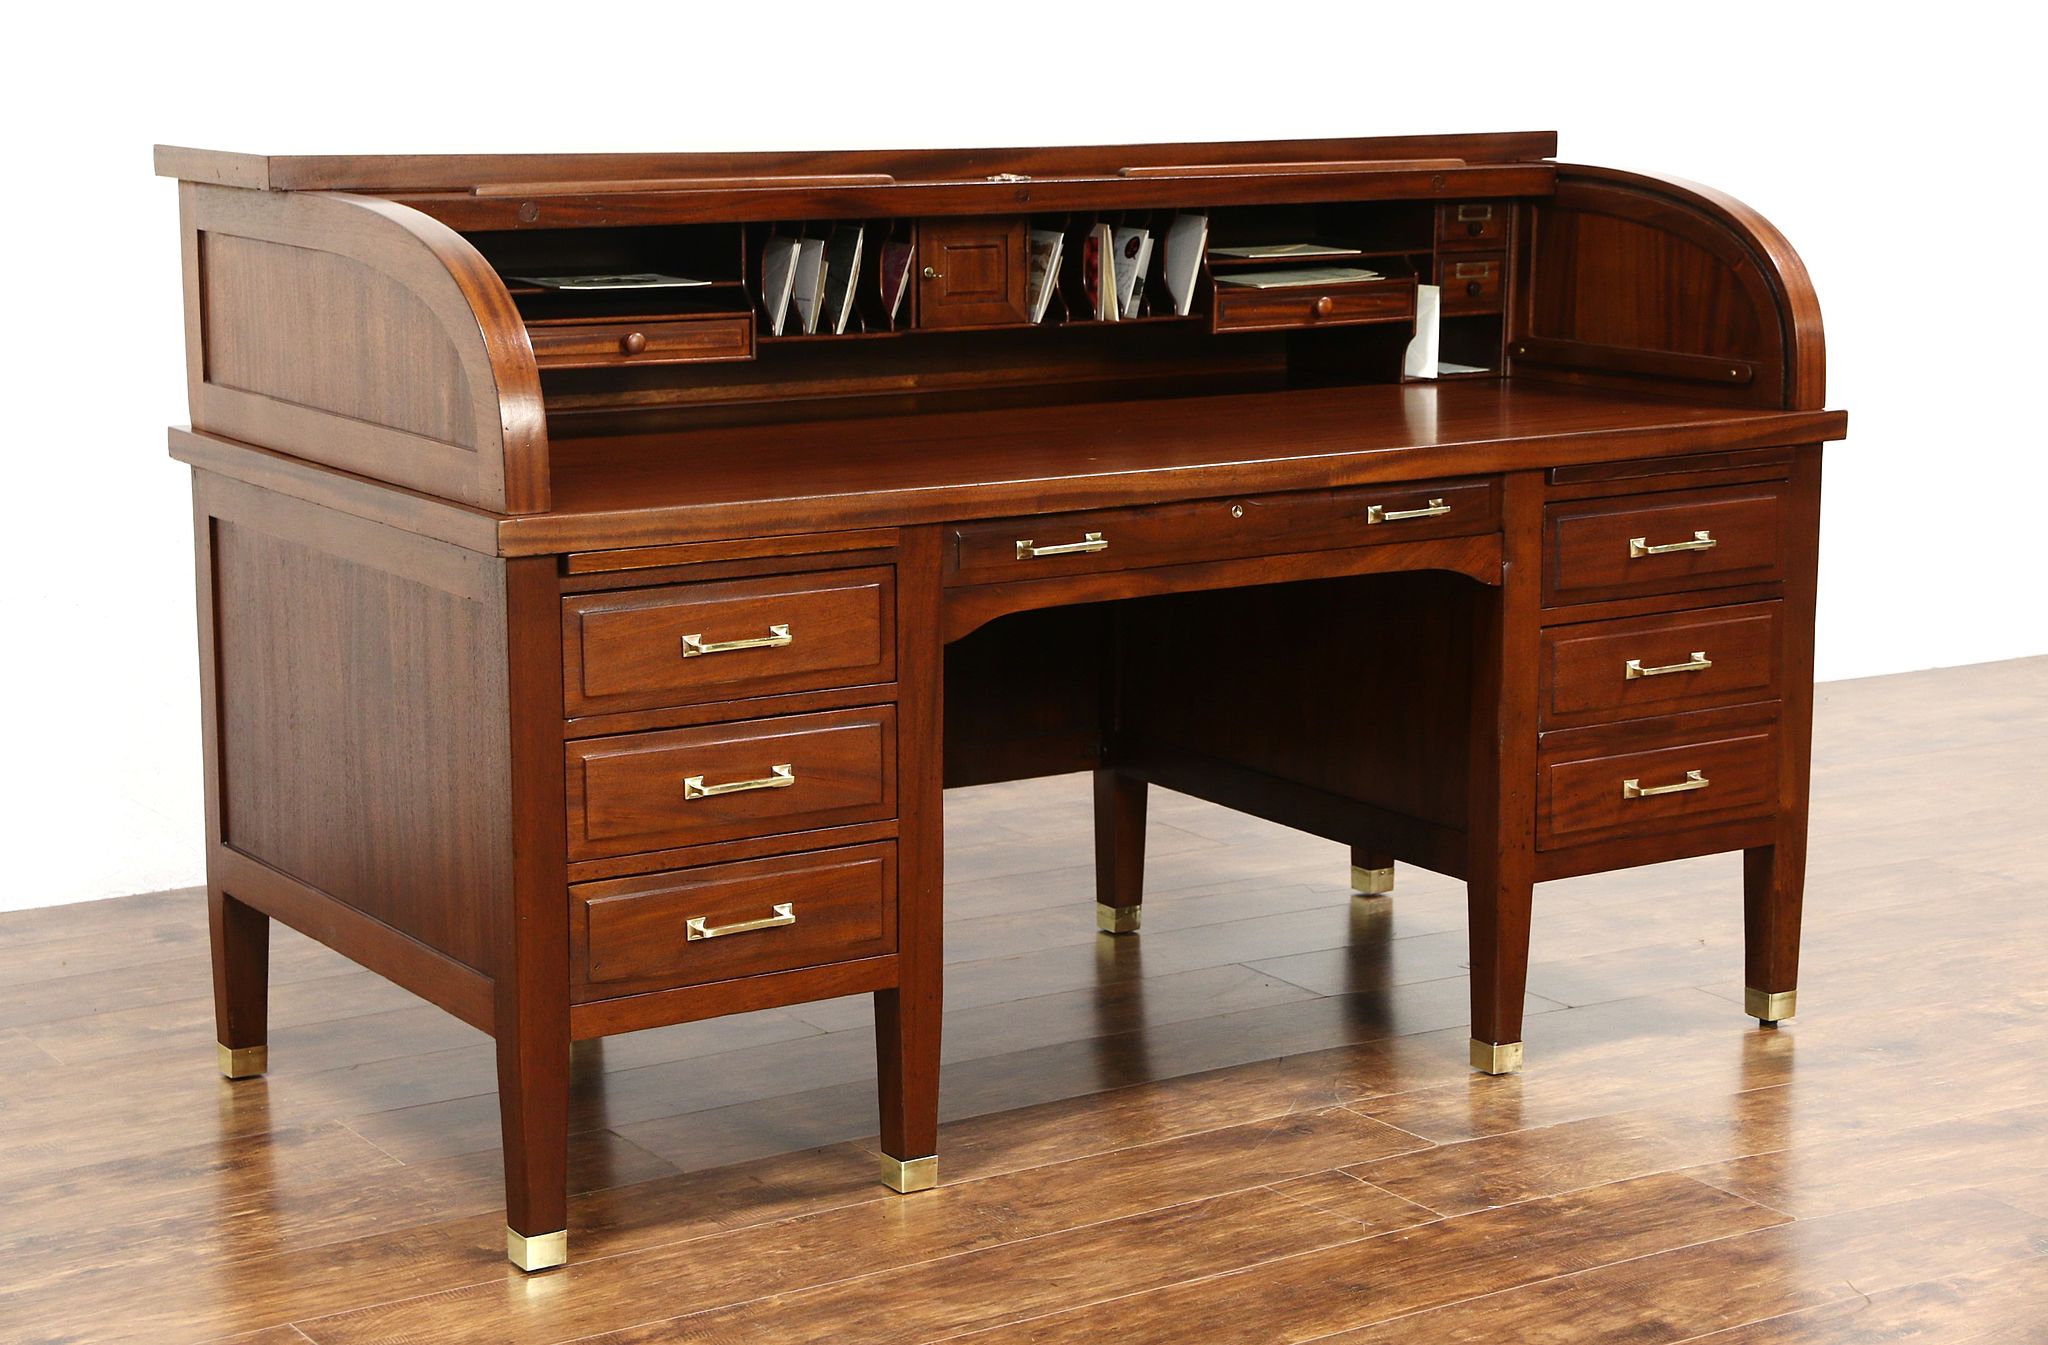 Sold Mahogany 1900 Antique 6 Roll Top Desk Signed West Of